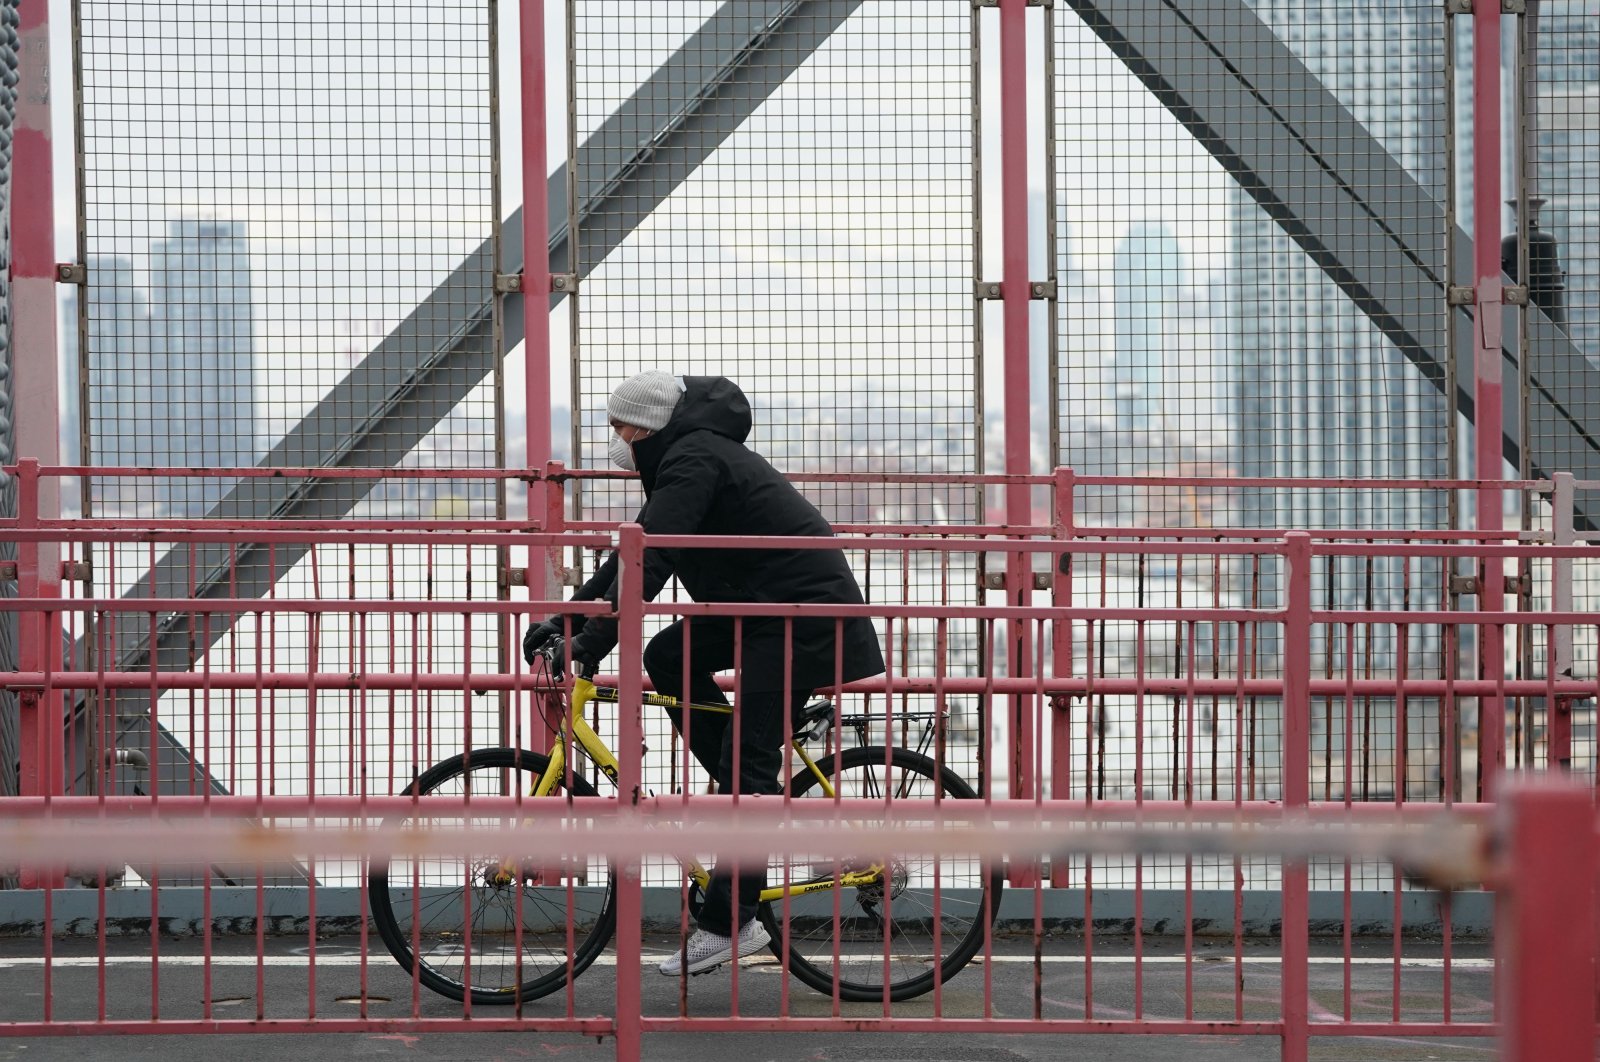 A cyclist wearing a mask rides over the Williamsburg Bridge in the Borough of Brooklyn on March 25, 2020 in New York. (AFP Photo)